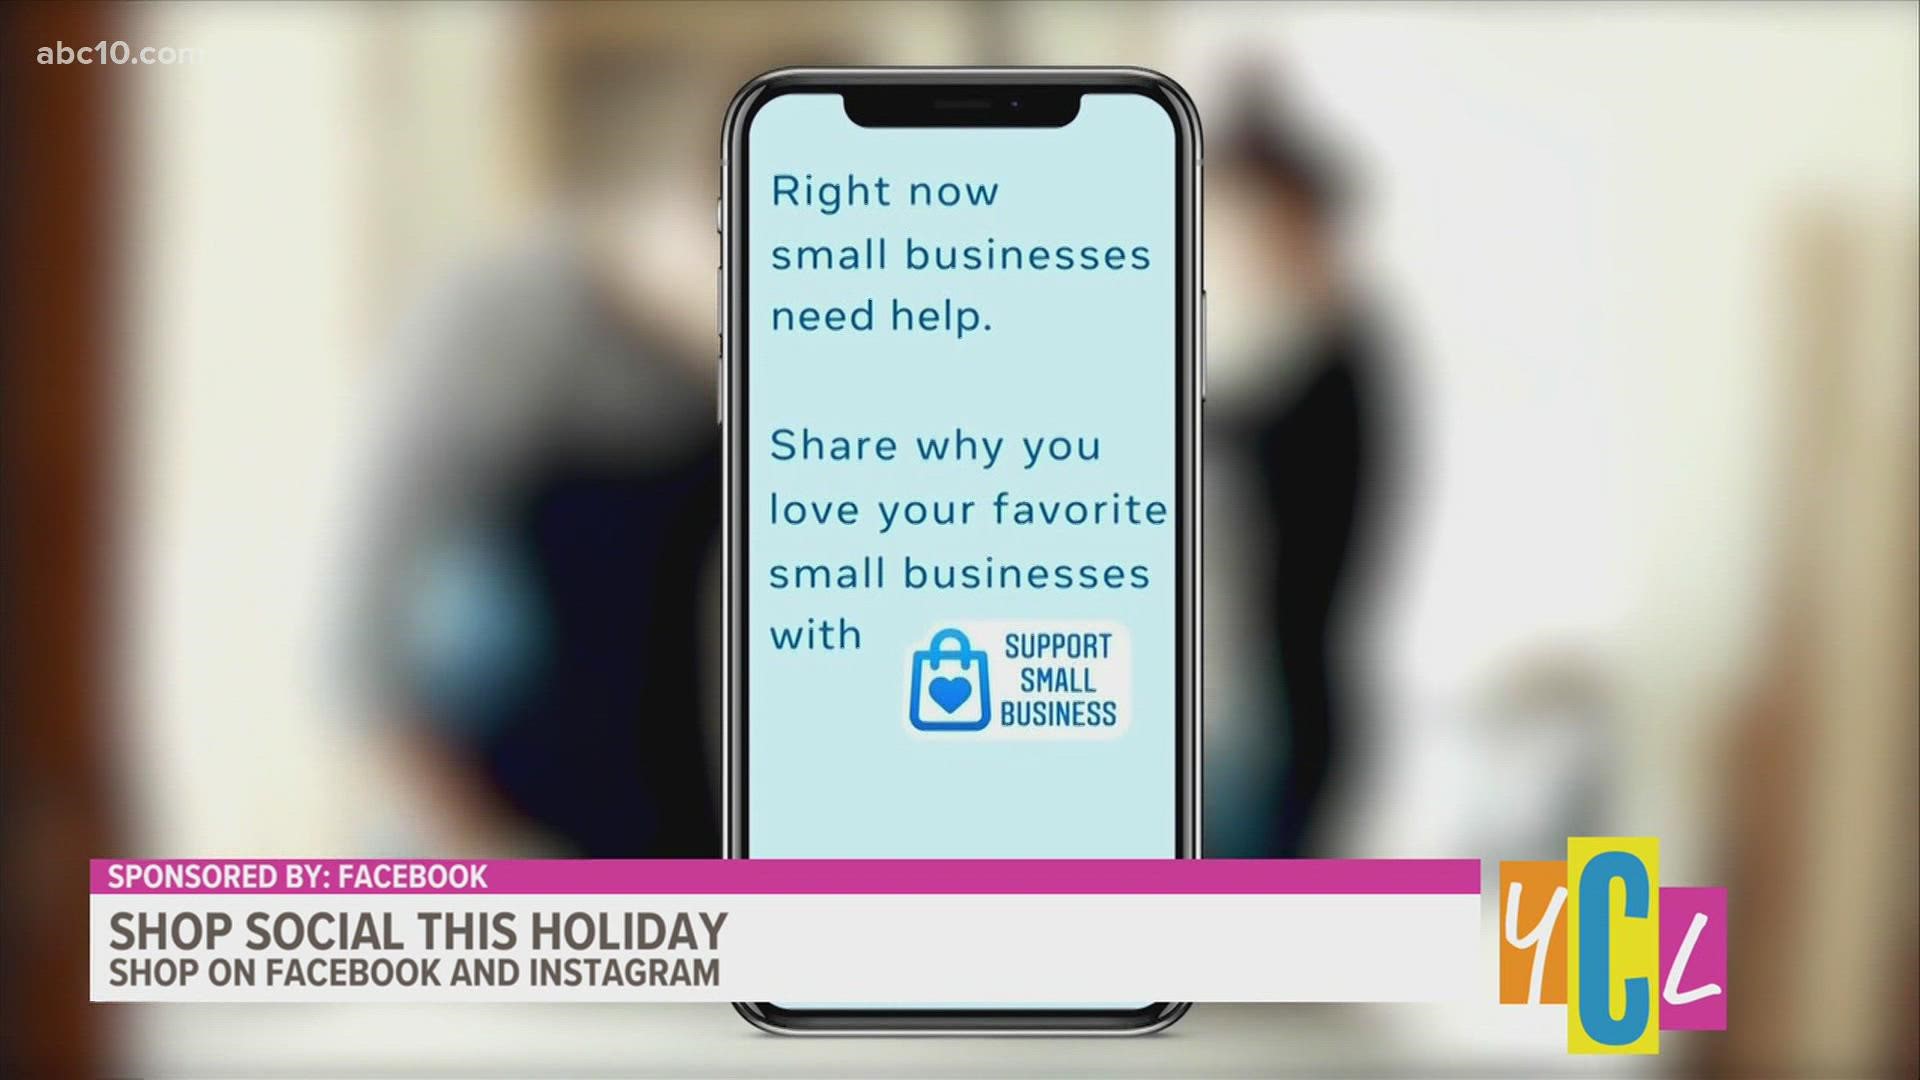 Smart shopping expert Trae Bodge unwraps holiday shopping tips and experiences to find good deals and sales across social media. This segment paid for by Facebook.